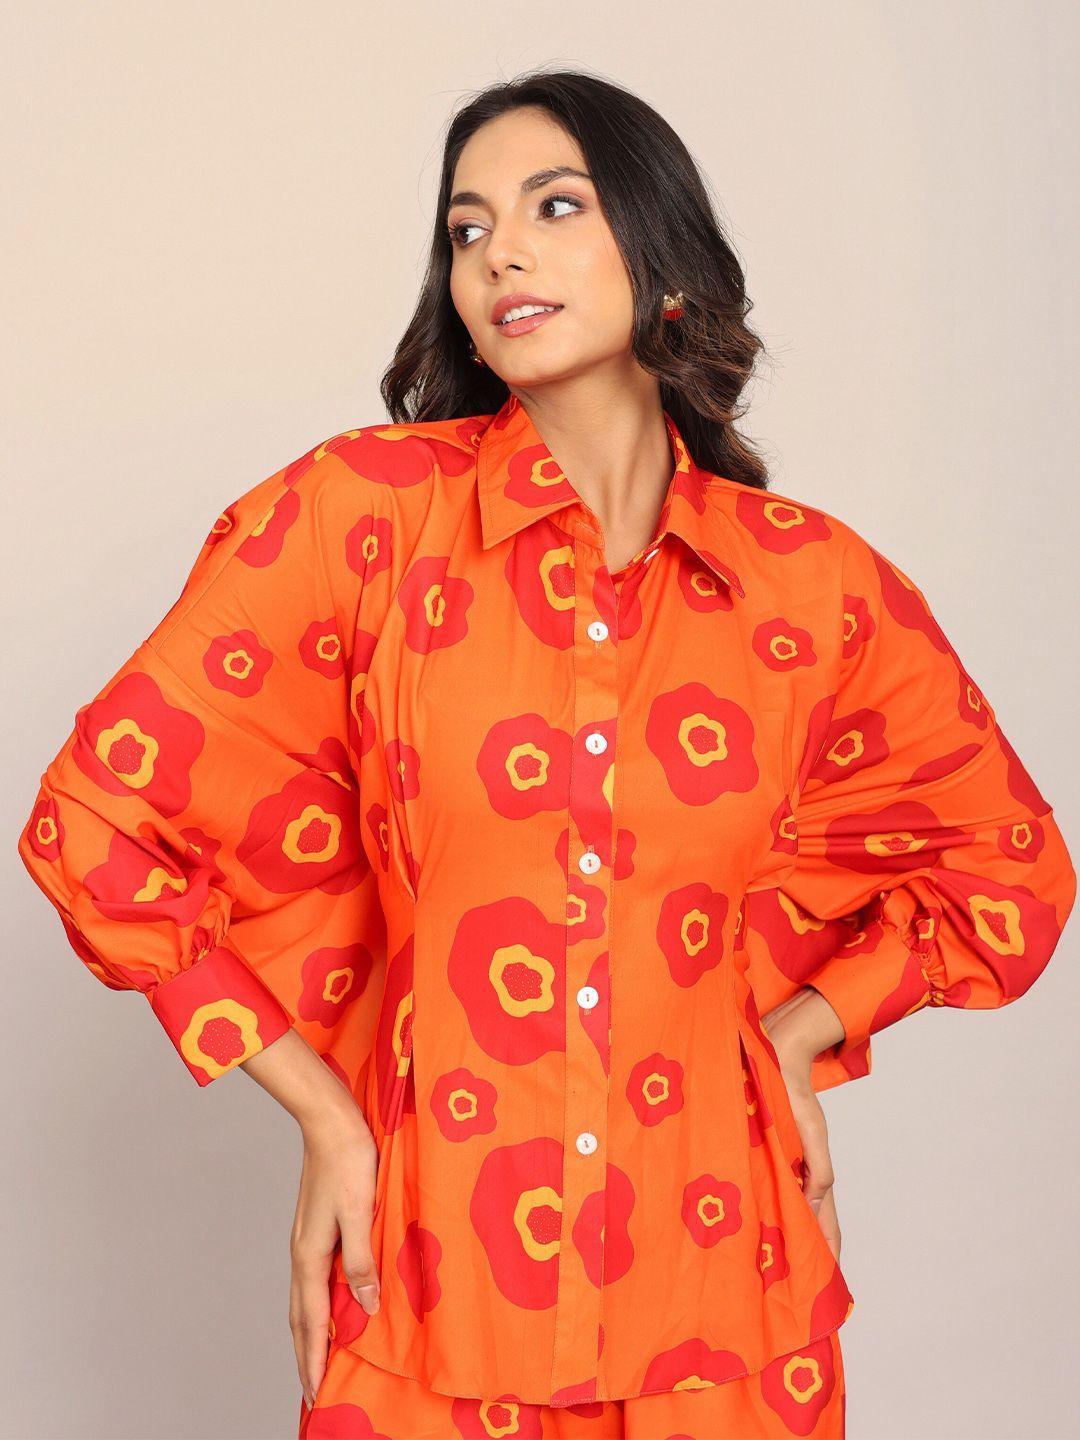 kaori by shreya agarwal bliss comfort opaque floral printed relaxed casual shirt with belt